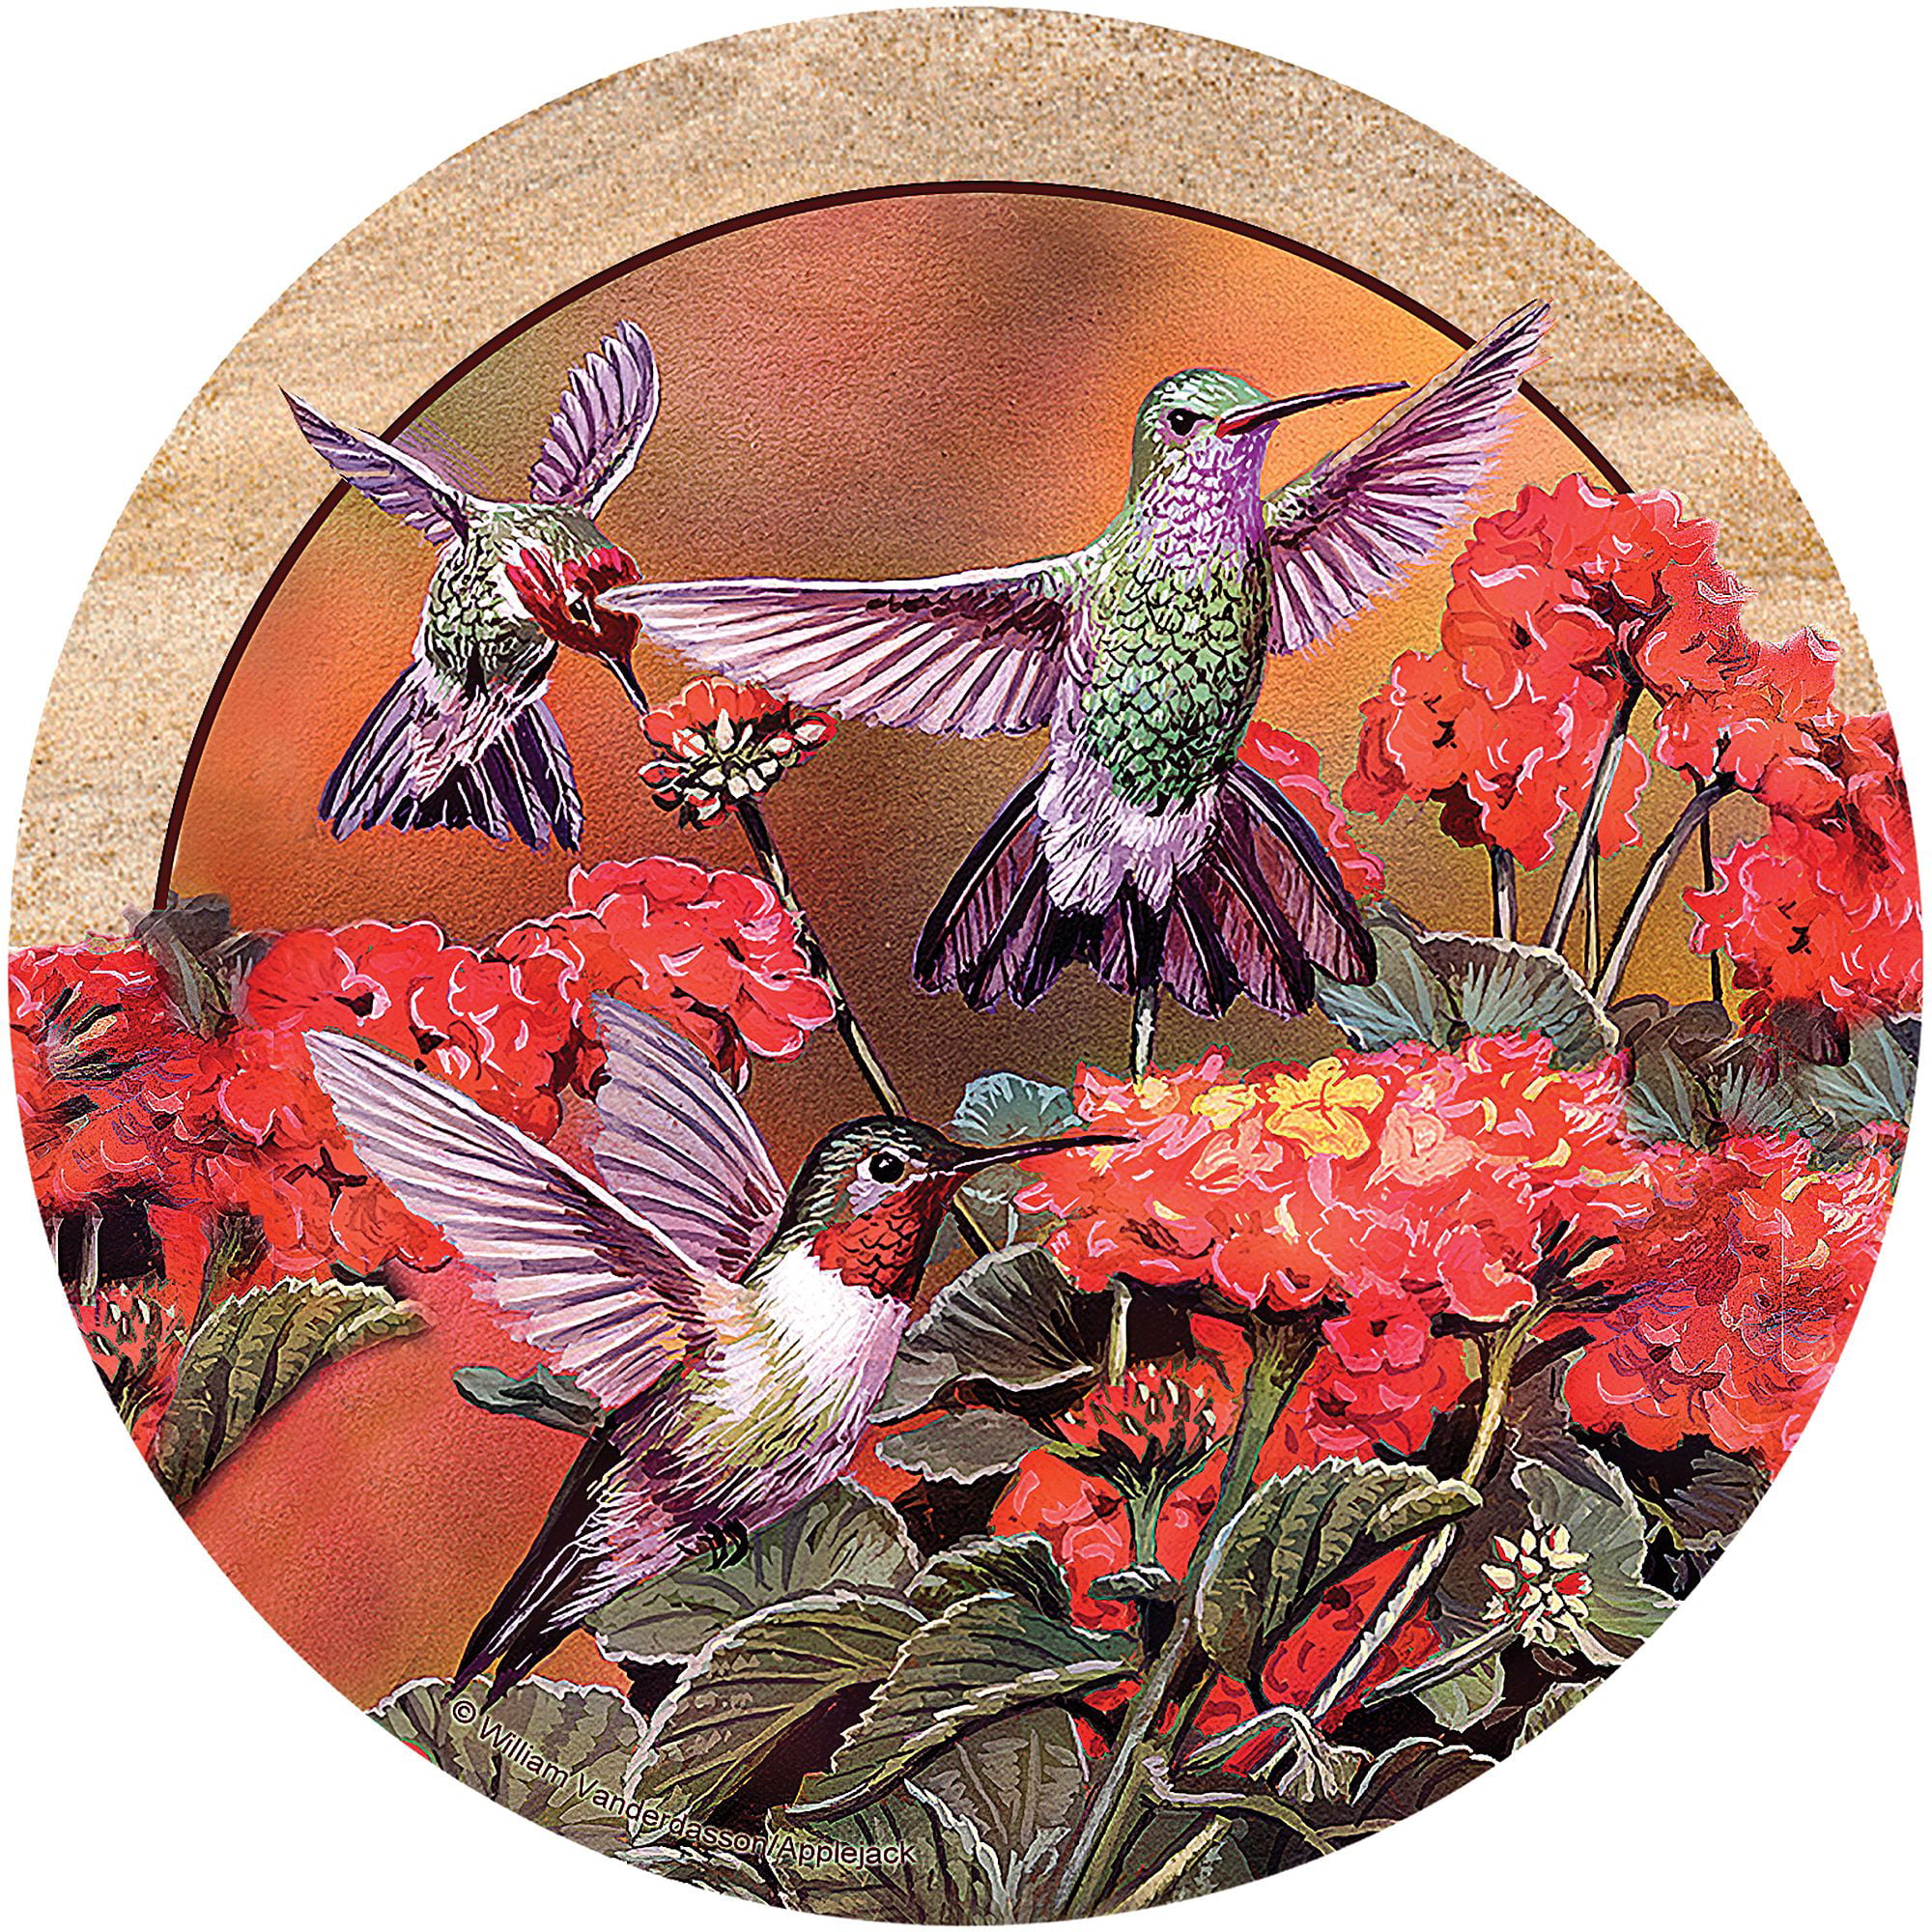 Hummingbird Eating From Pink Flower Set of 4 Coasters 